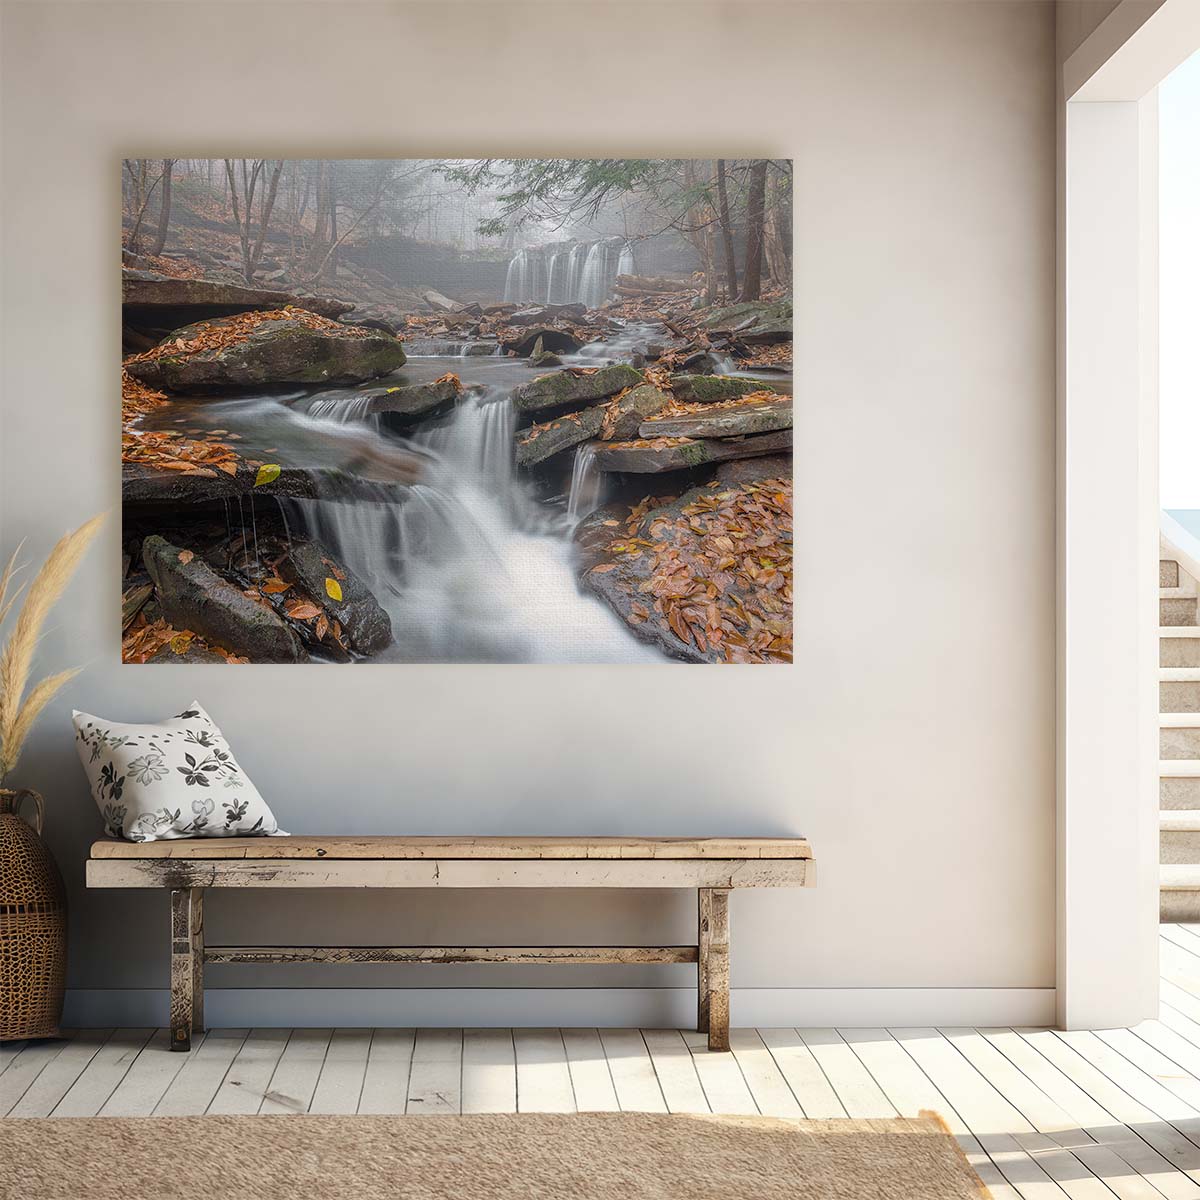 Autumn Morning Mist Waterfall in Ricketts Glen Wall Art by Luxuriance Designs. Made in USA.